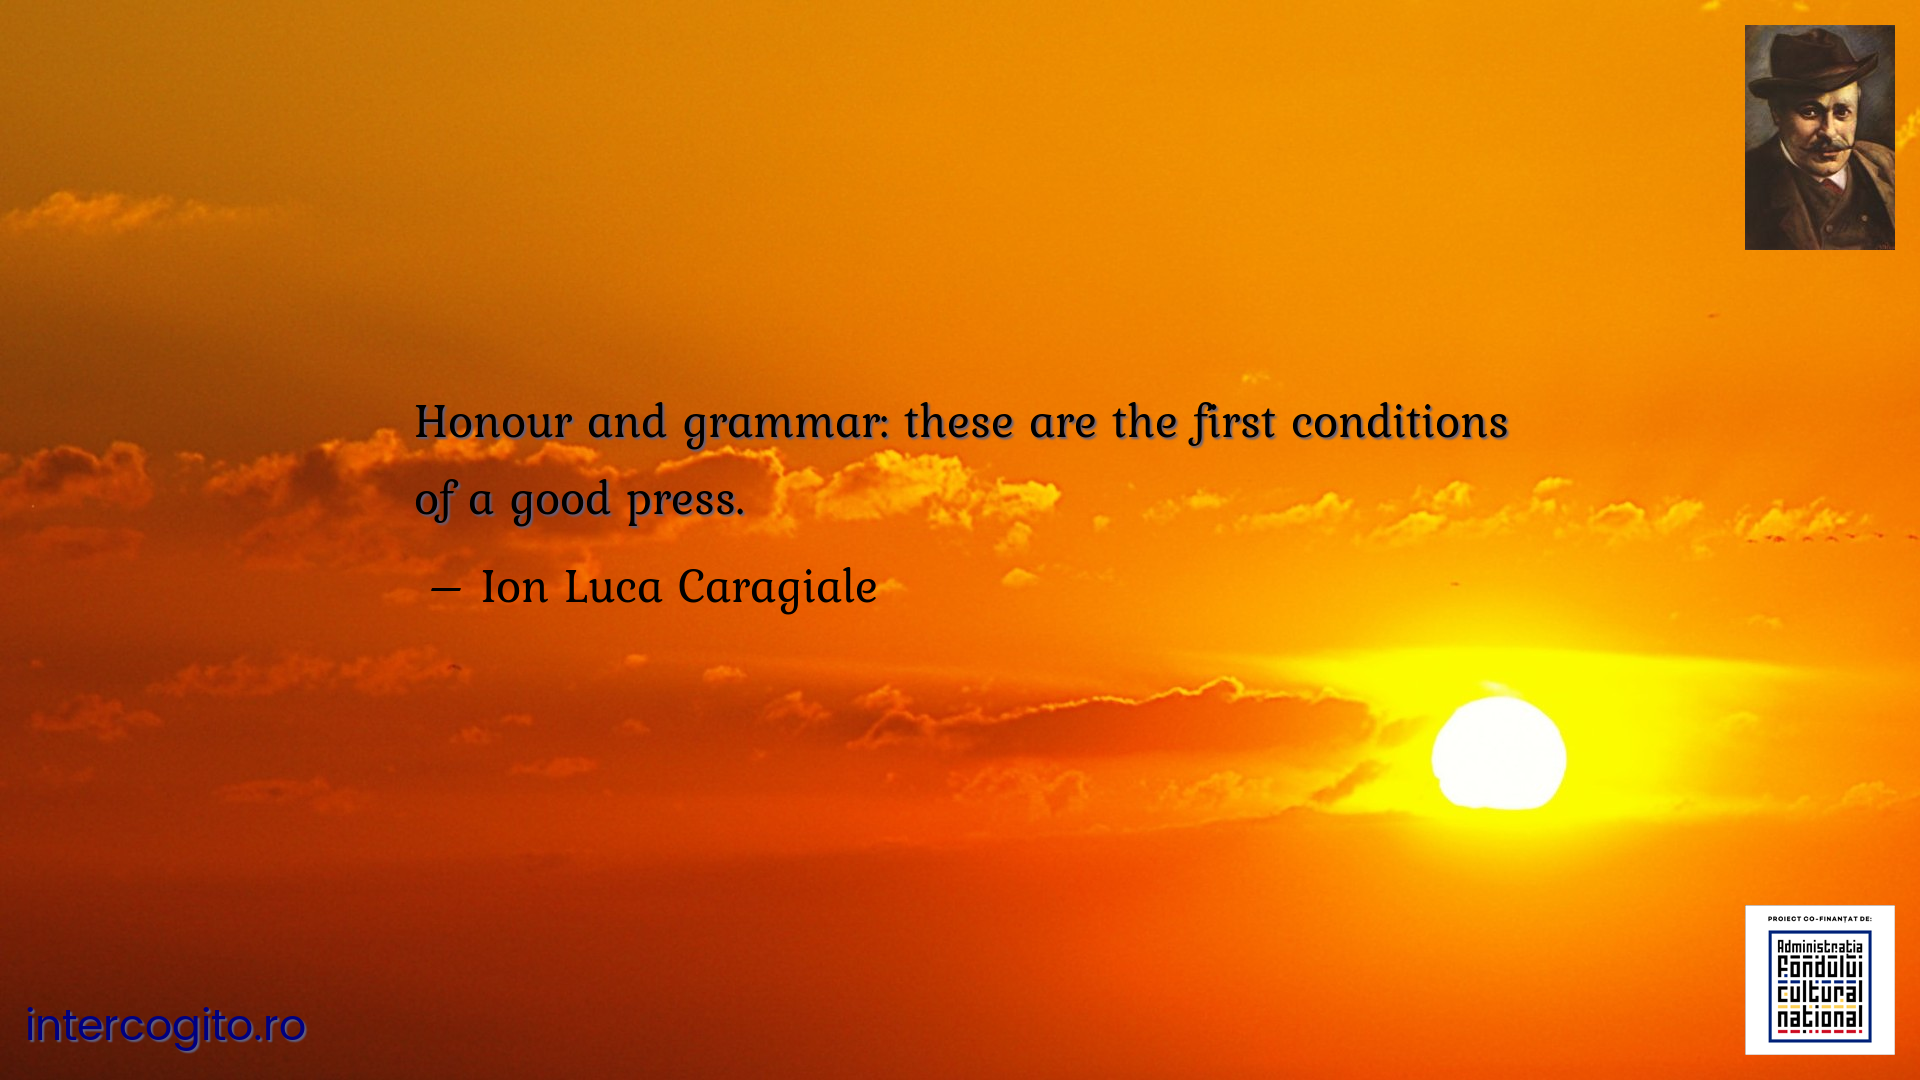 Honour and grammar: these are the first conditions of a good press.